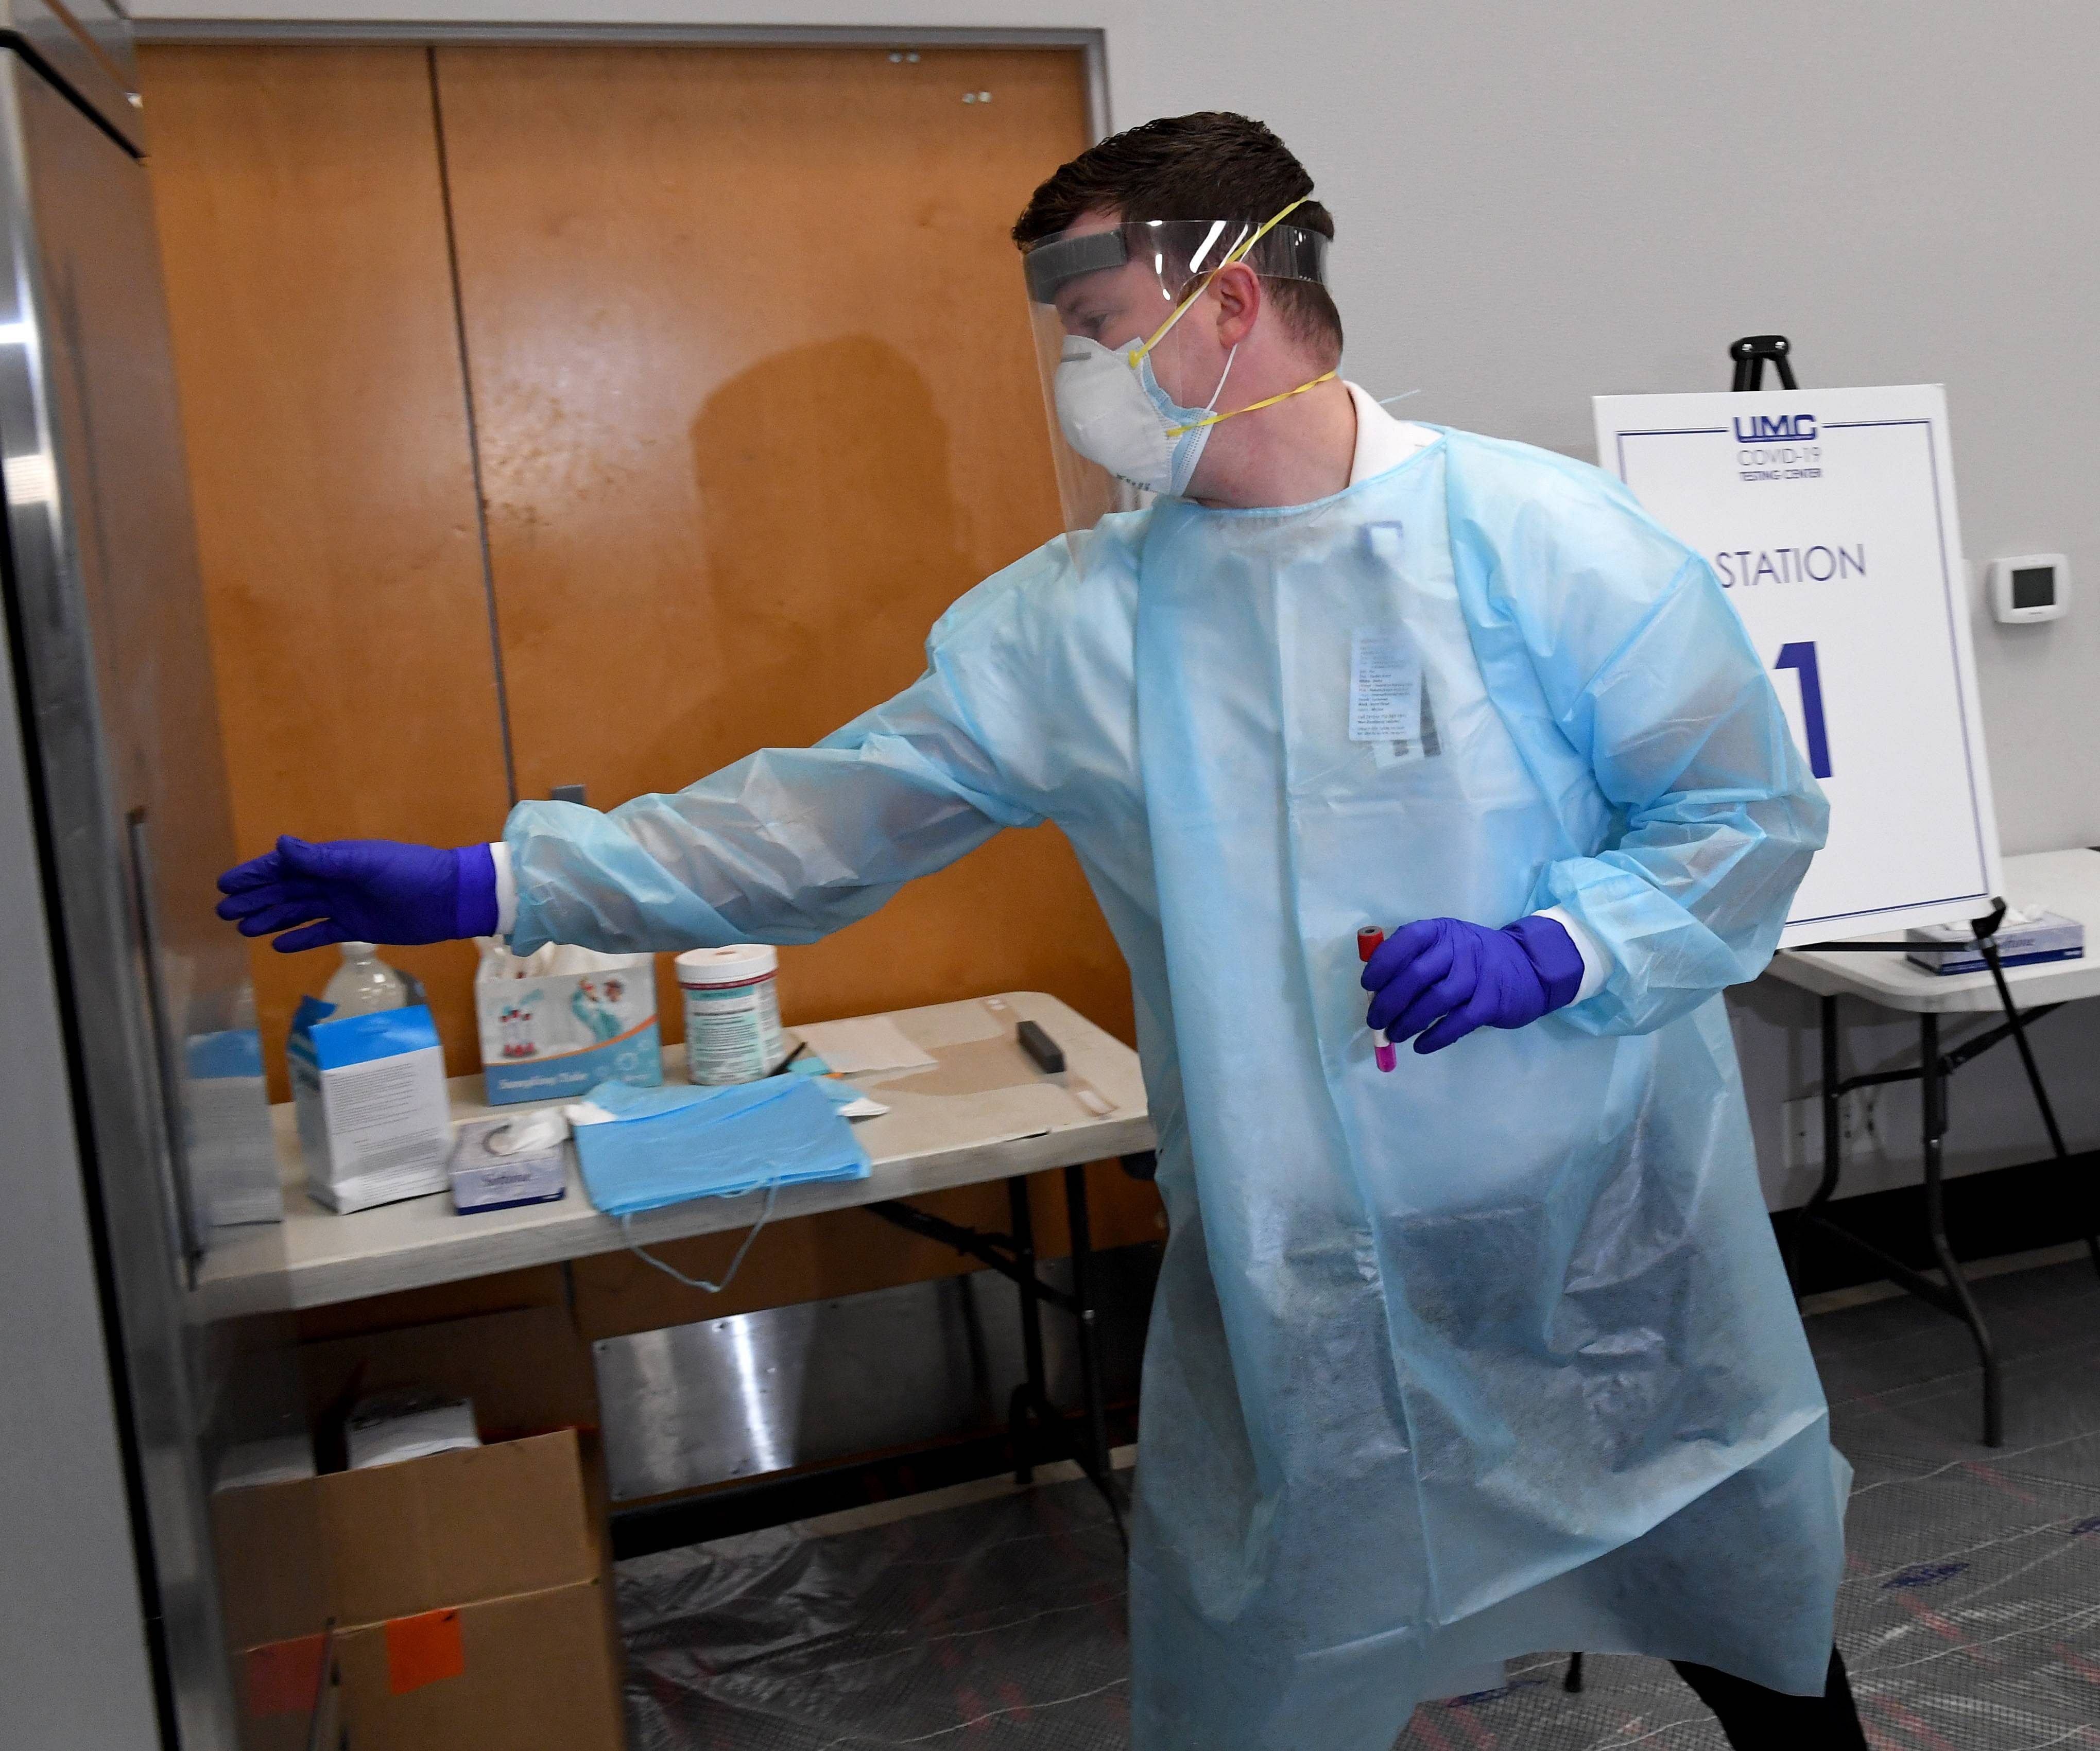 University Medical Center of Southern Nevada supervisor Isaac Nielson puts a coronavirus (COVID-19) specimen sampling tube into a refrigerator during a preview of a testing site at the Stan Fulton - International Gaming Institute Building at UNLV on November 30, 2020 in Las Vegas, Nevada. The state set its two highest single-day COVID-19 case records and surpassed 150,000 total cases last week. Nevada has seen a sharp upward climb in the test positivity rate since the end of October, which has now grown to more than 17 percent. Clark County and UMC are operating the new site, which has separate areas for people who arrive with and without symptoms of COVID-19, in partnership with the Nevada National Guard and University Police Services. Credit: Getty Images/AFP